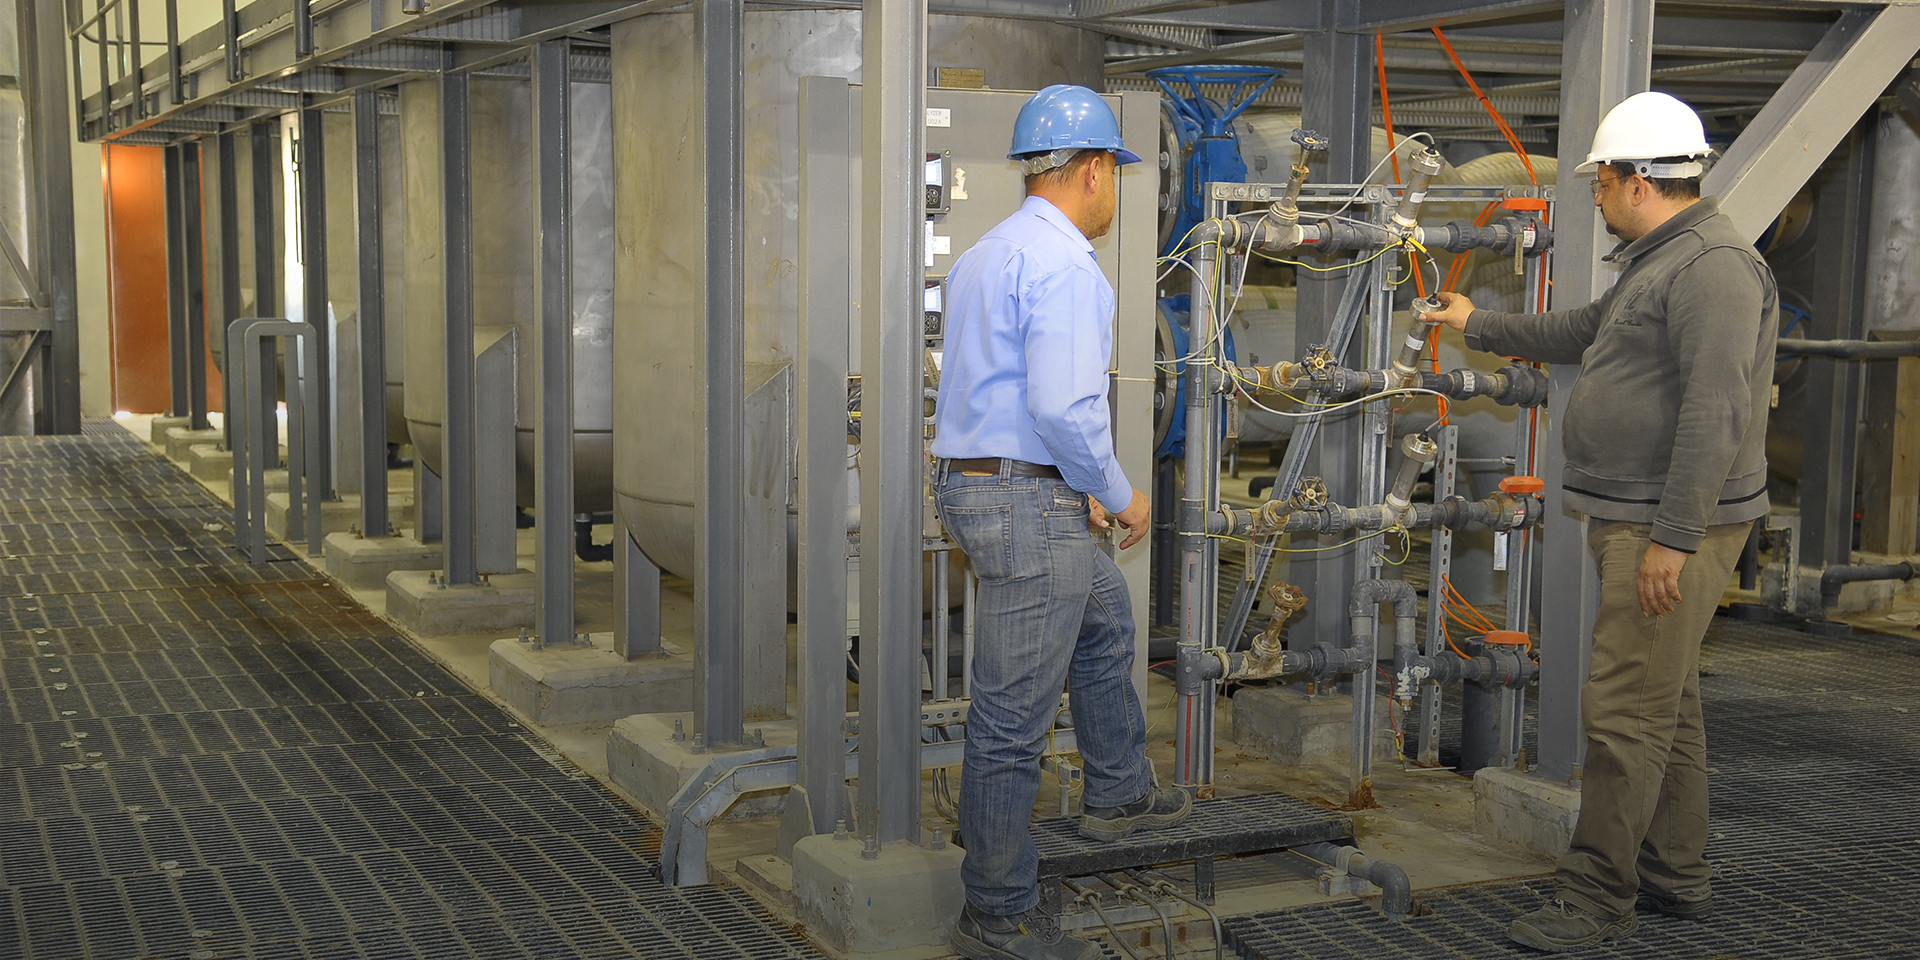 Two men in hard hats inspecting several pipes and valves in a water treatment facility.